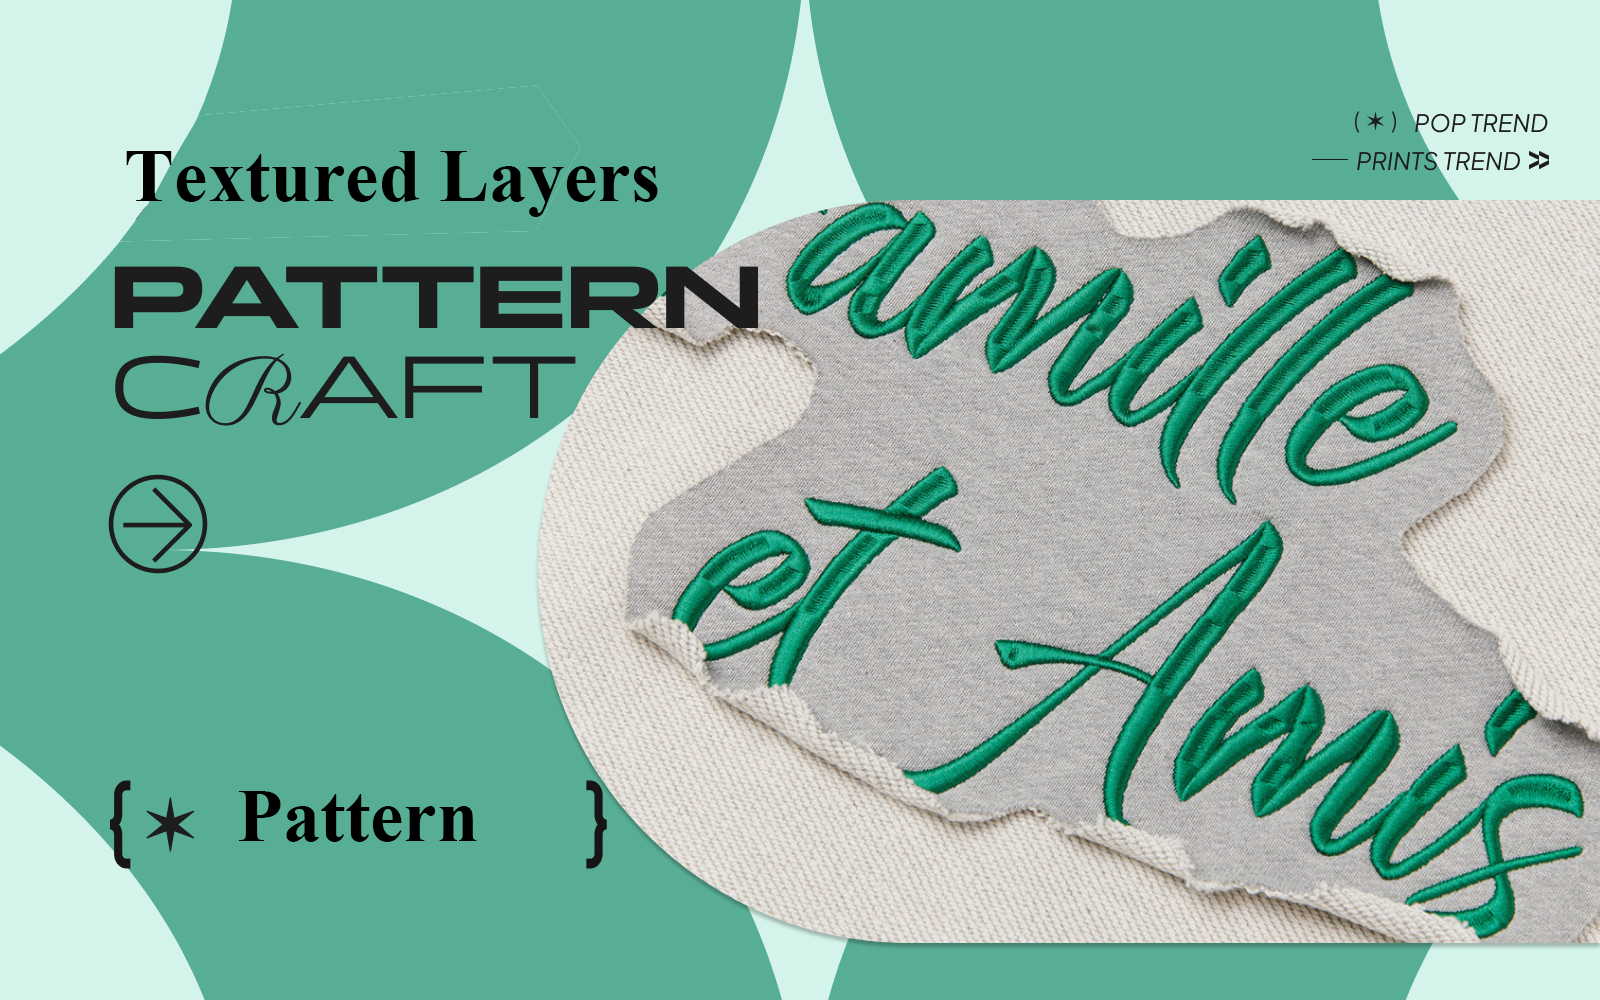 Textured Layers -- The Pattern Craft Trend